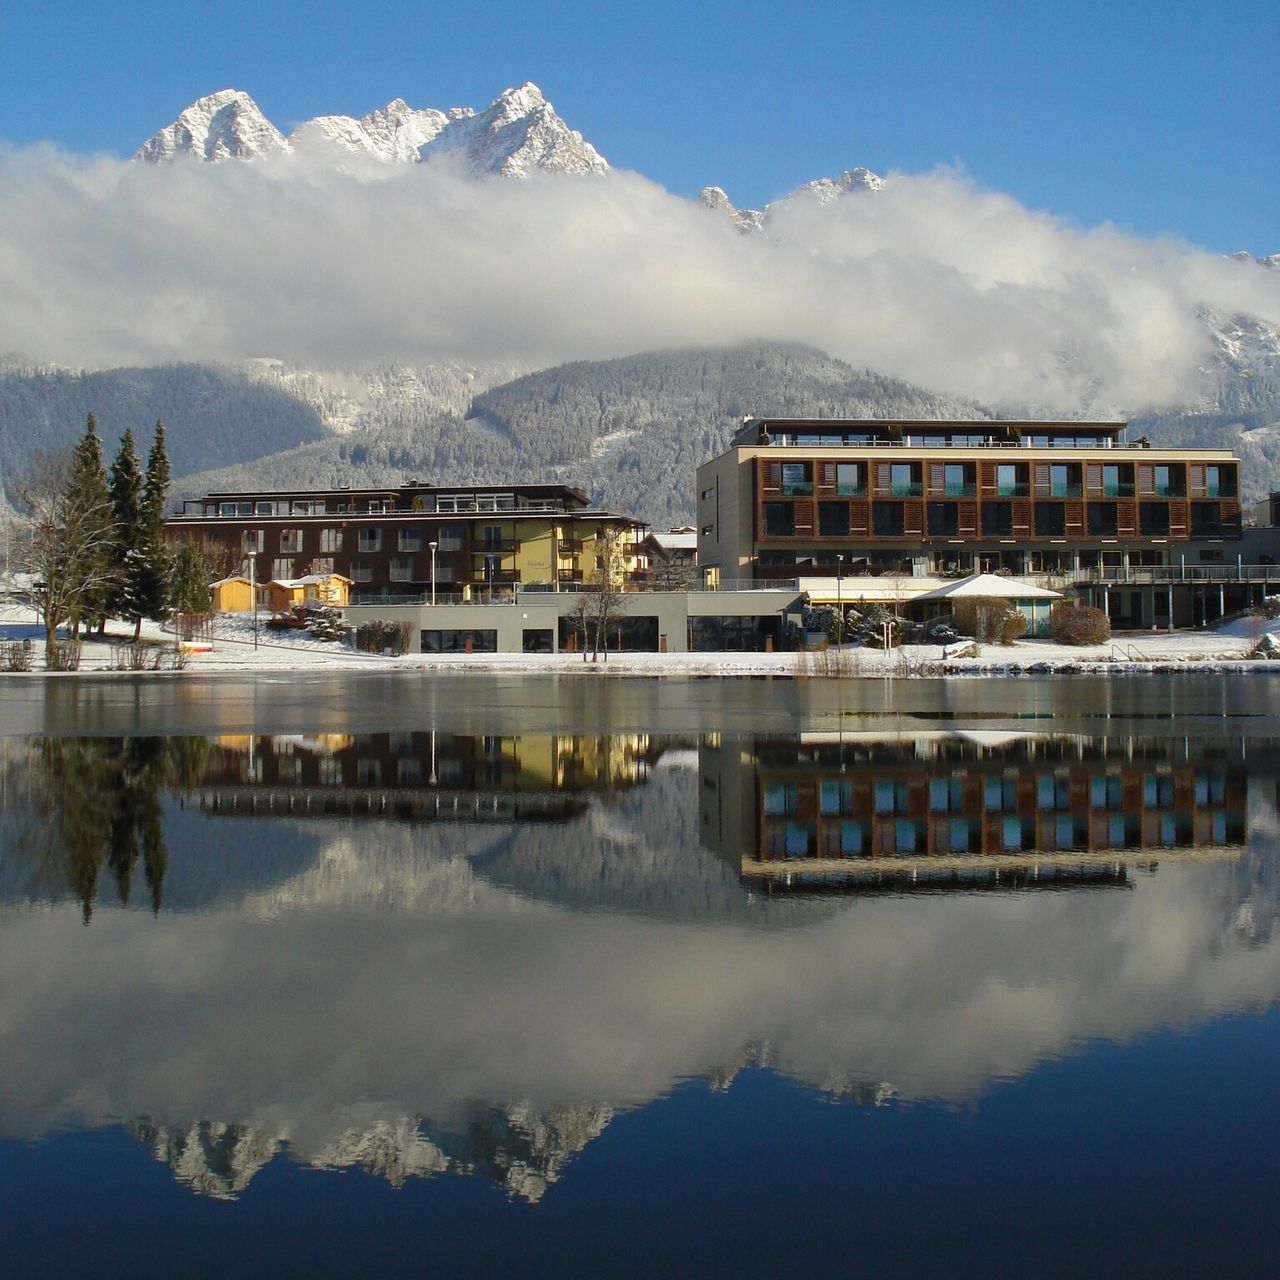 mountain, mountain range, winter, snow, cold temperature, architecture, building exterior, built structure, sky, reflection, season, cloud - sky, lake, house, snowcapped mountain, nature, scenics, beauty in nature, tranquility, tranquil scene